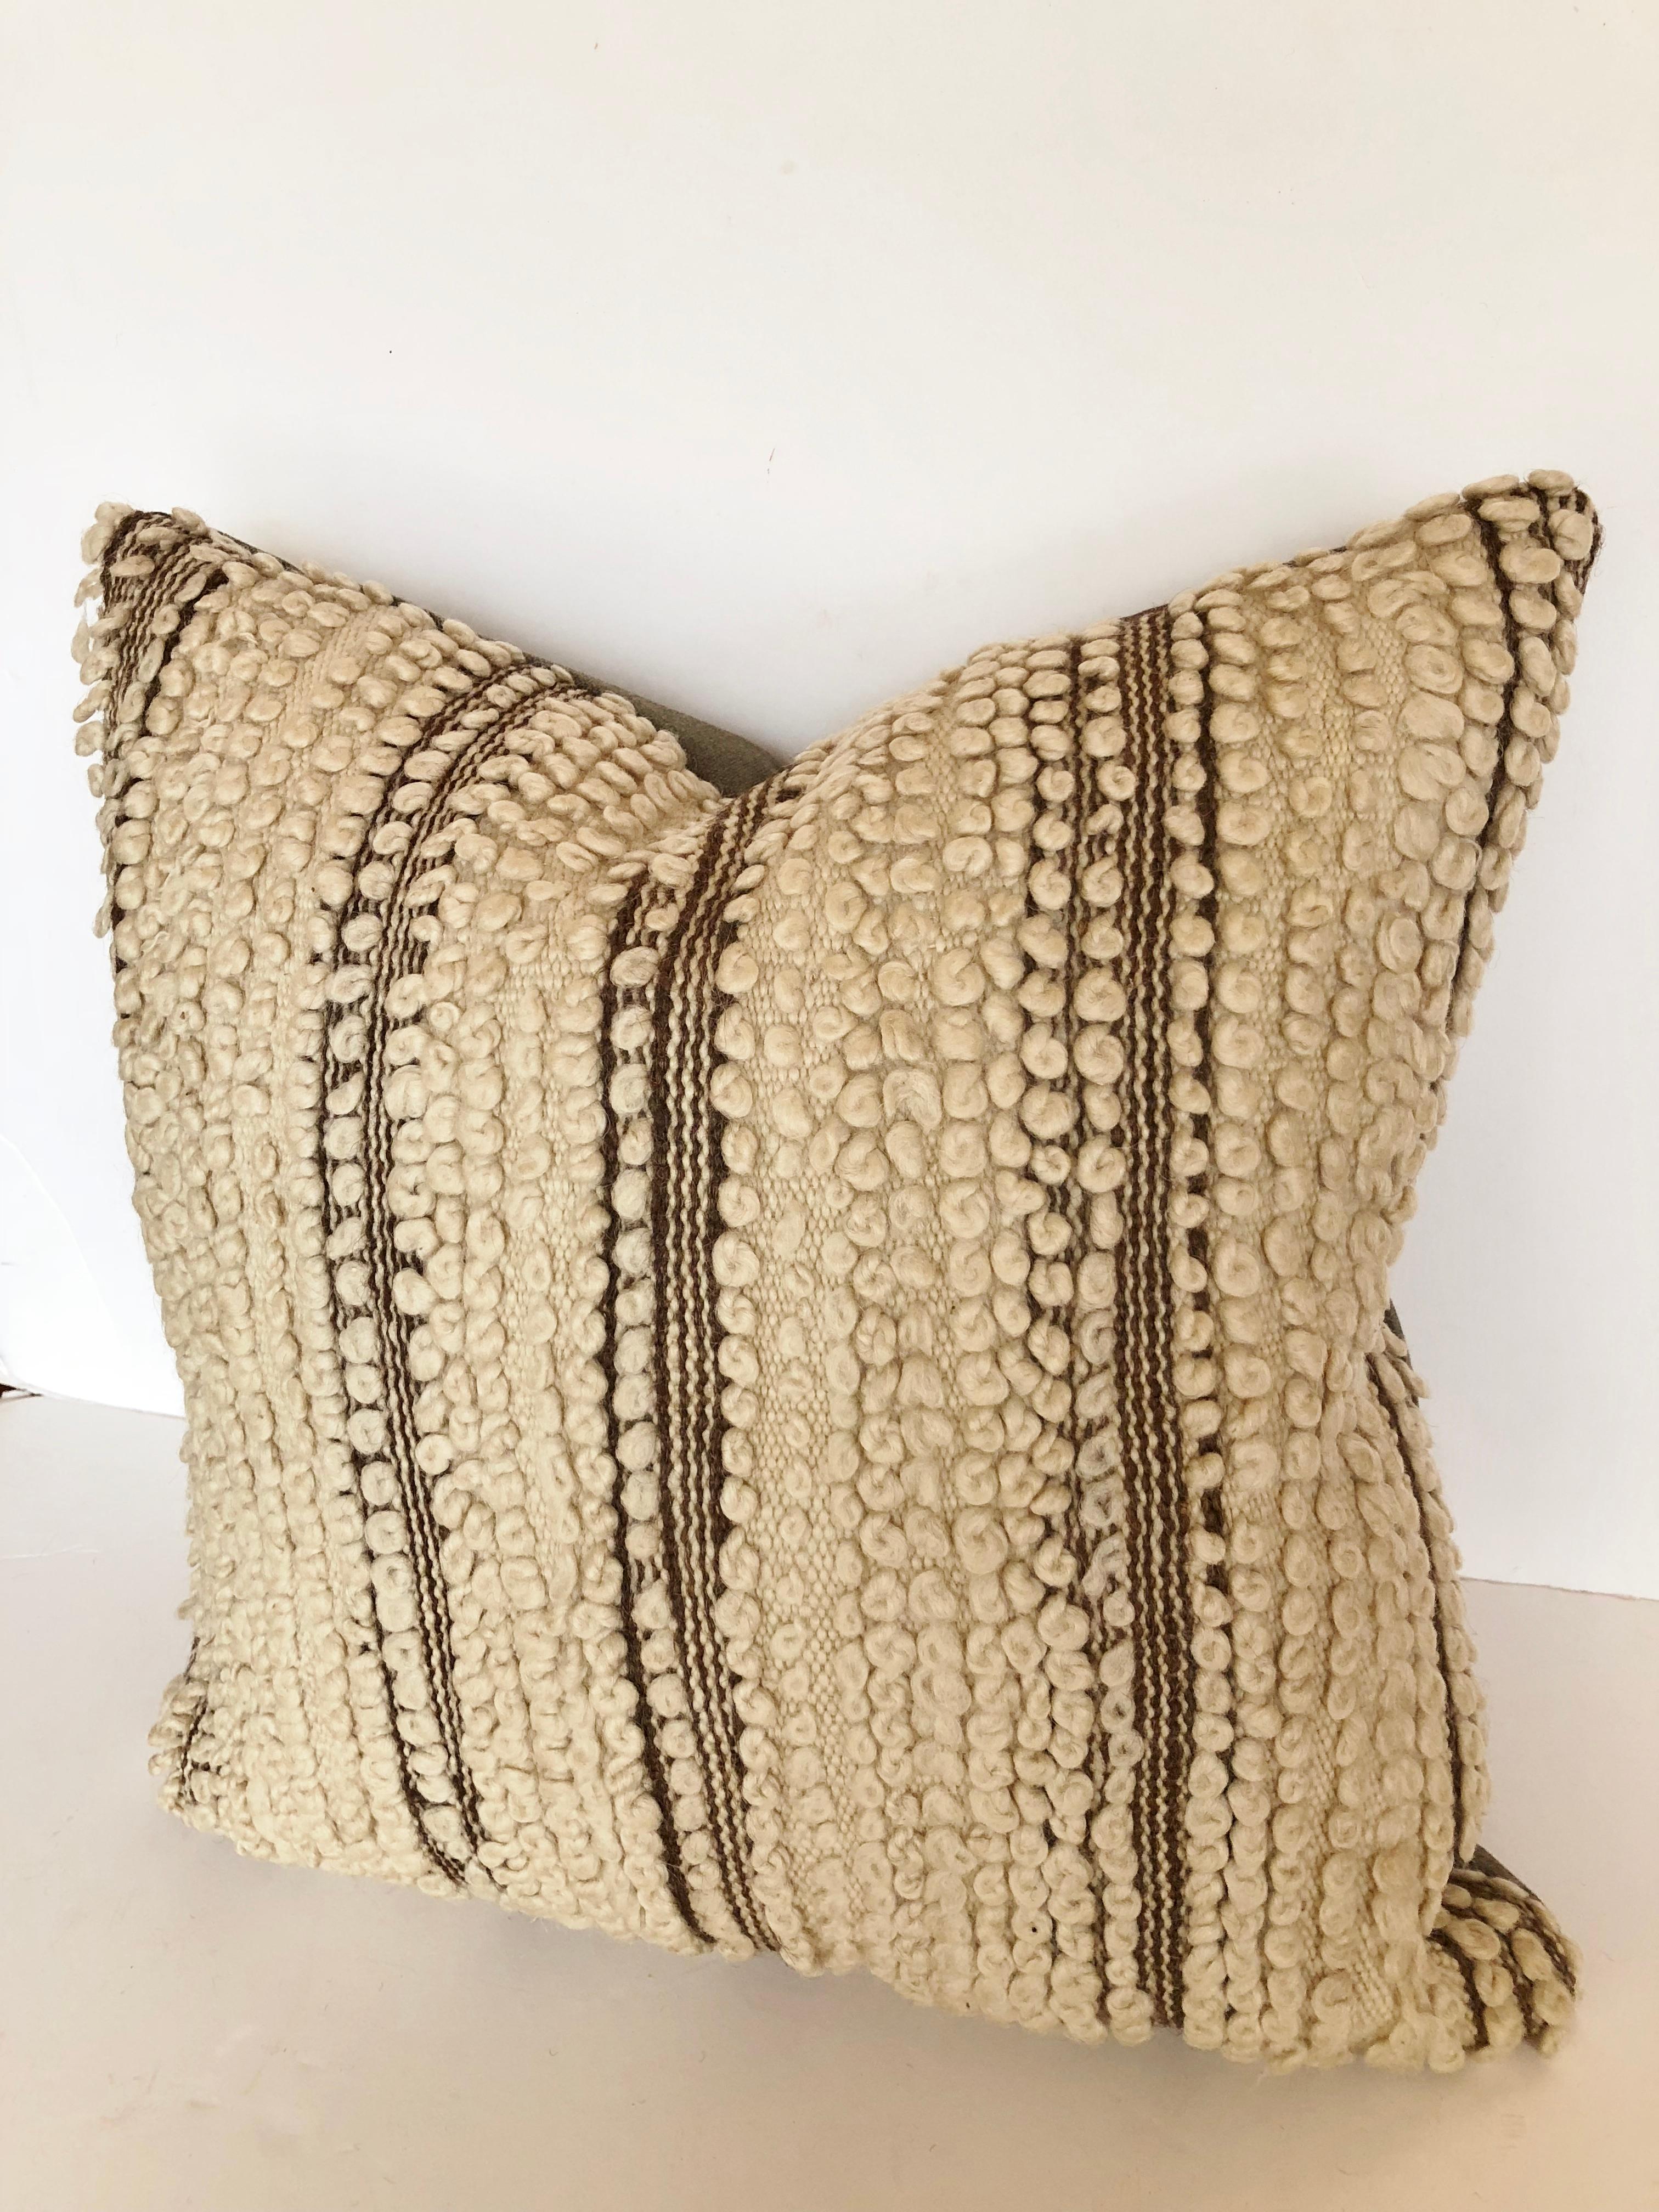 Custom pillow made from a vintage hand loomed wool Beni Ouarain rug from the Atlas Mountains. Wool is soft and lustrous with all natural color. Pillow is backed in a wool blend, filled with an insert of 50/50 down and feathers and hand sewn closed.